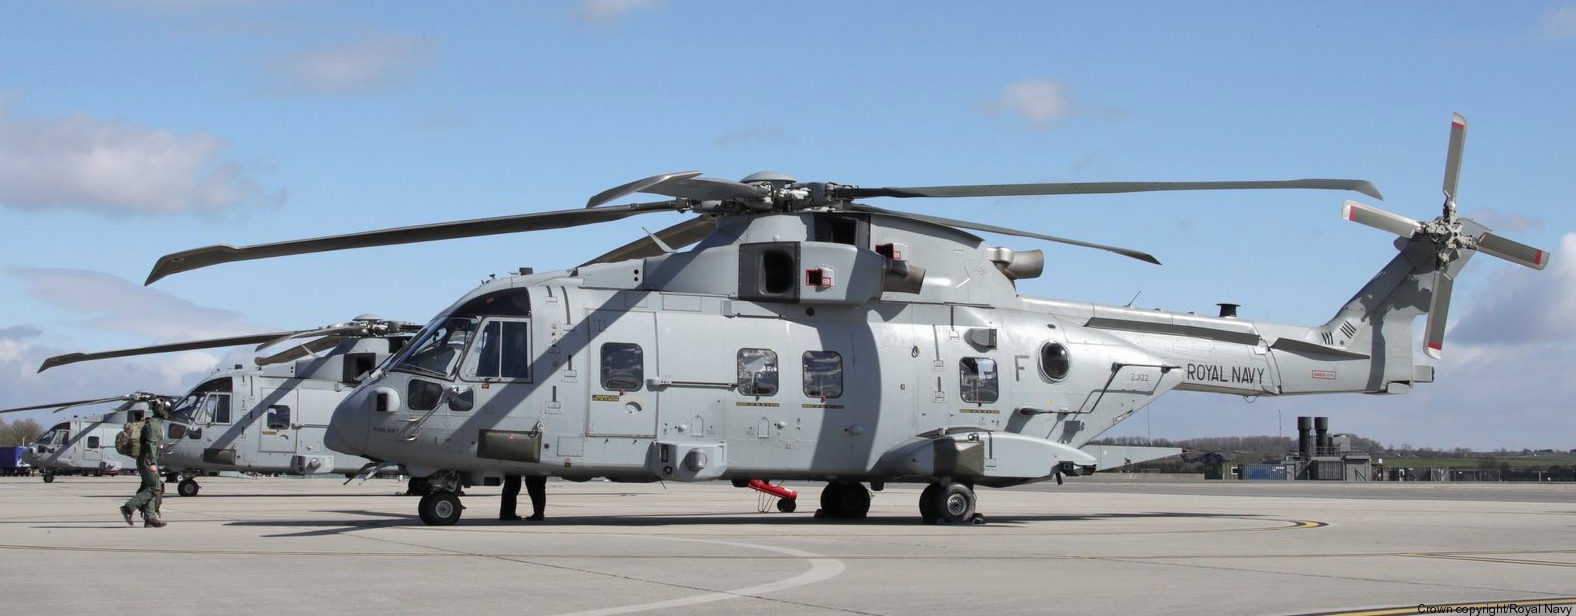 merlin hc4 mk.4 commando helicopter force chf royal navy 845 846 naval air squadron rnas yeovilton aw101 18